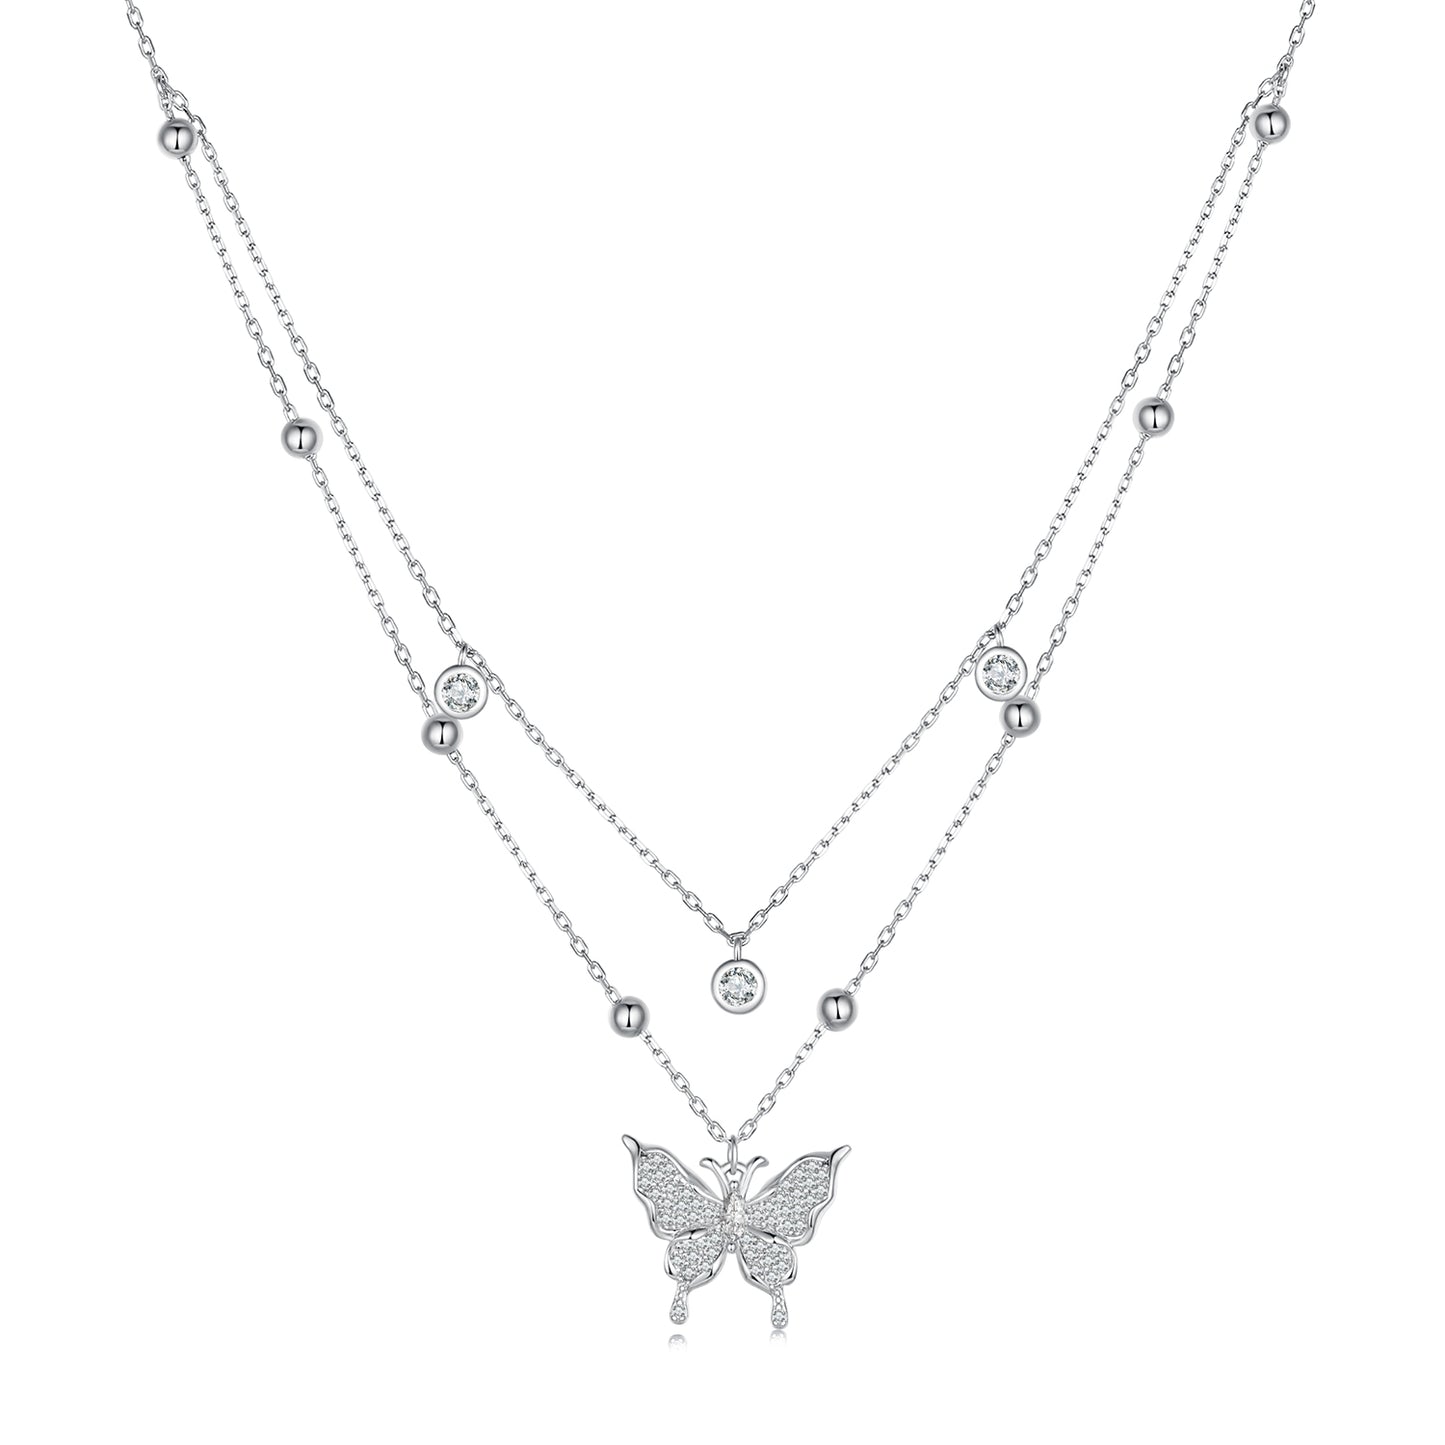 Elegant S925 Sterling Silver Necklace with Zircon Diamond - Butterfly Pendant